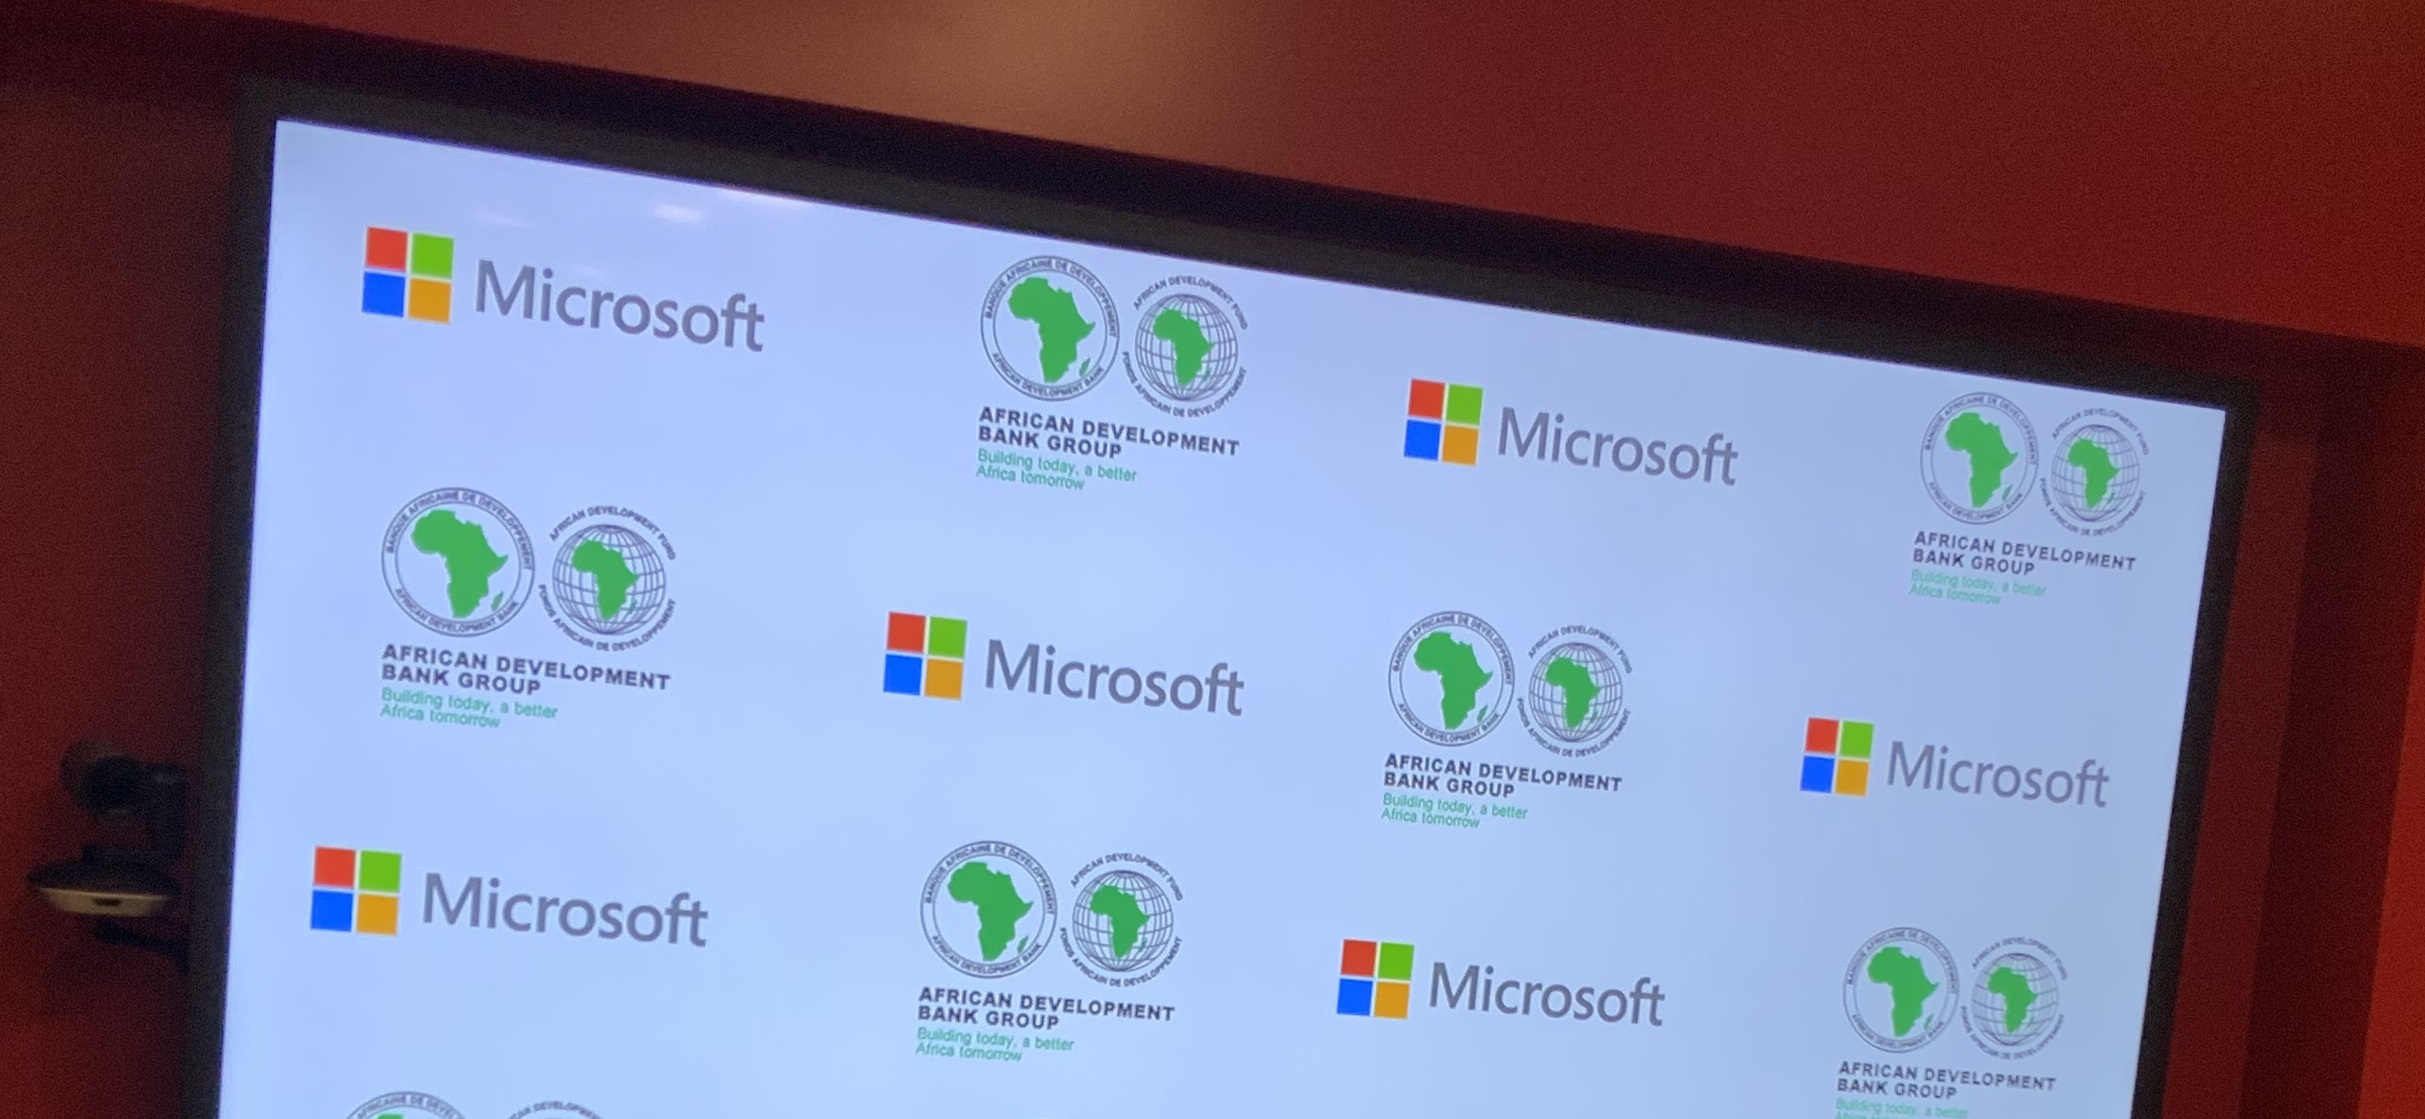 Microsoft targets lack of investment, affordable access to finance in a new AfDB partnership